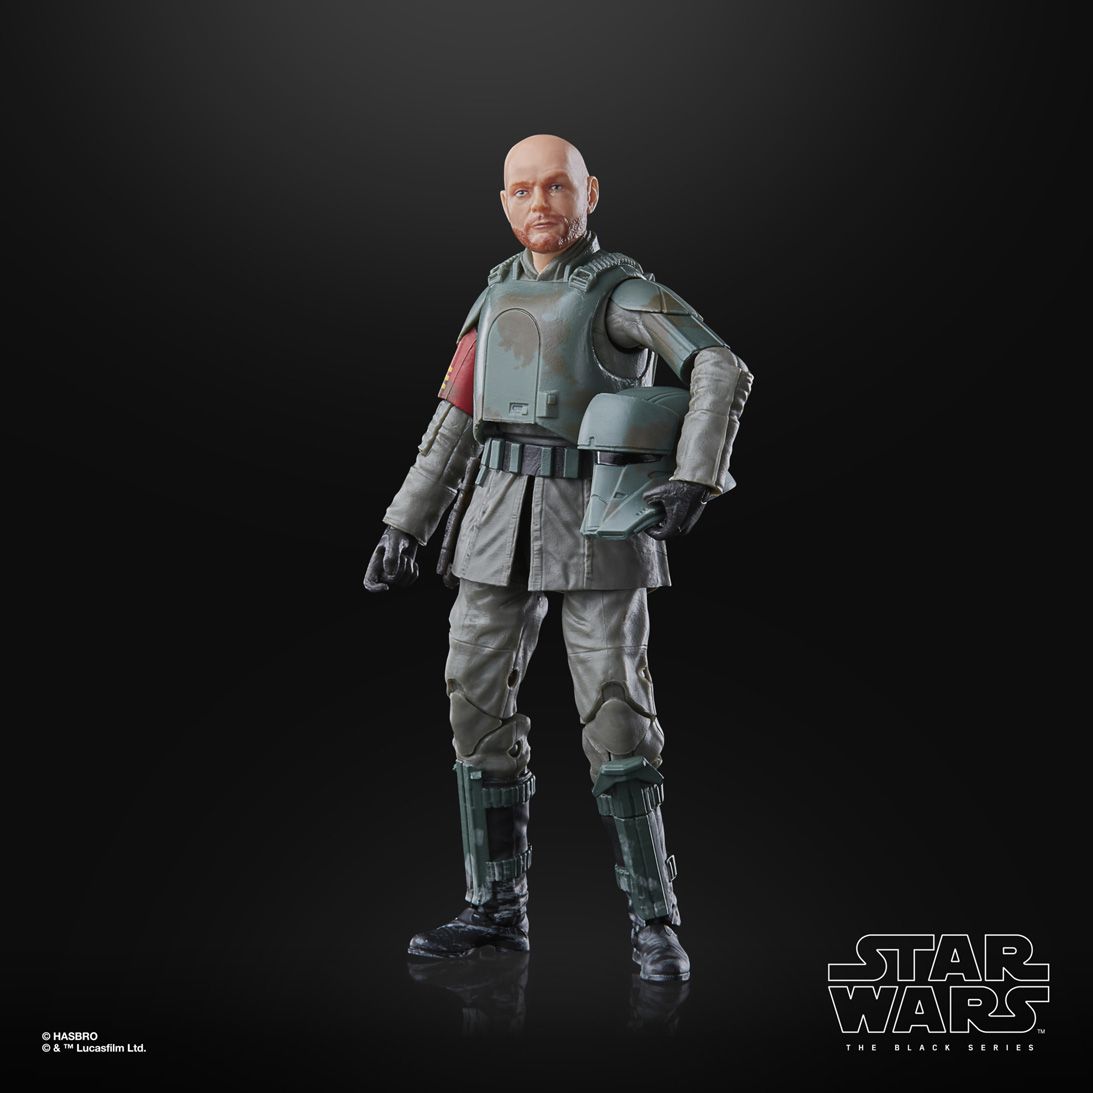 The Mandalorian S2 4 New Star Wars Black Series Figures Revealed [EXCLUSIVE]